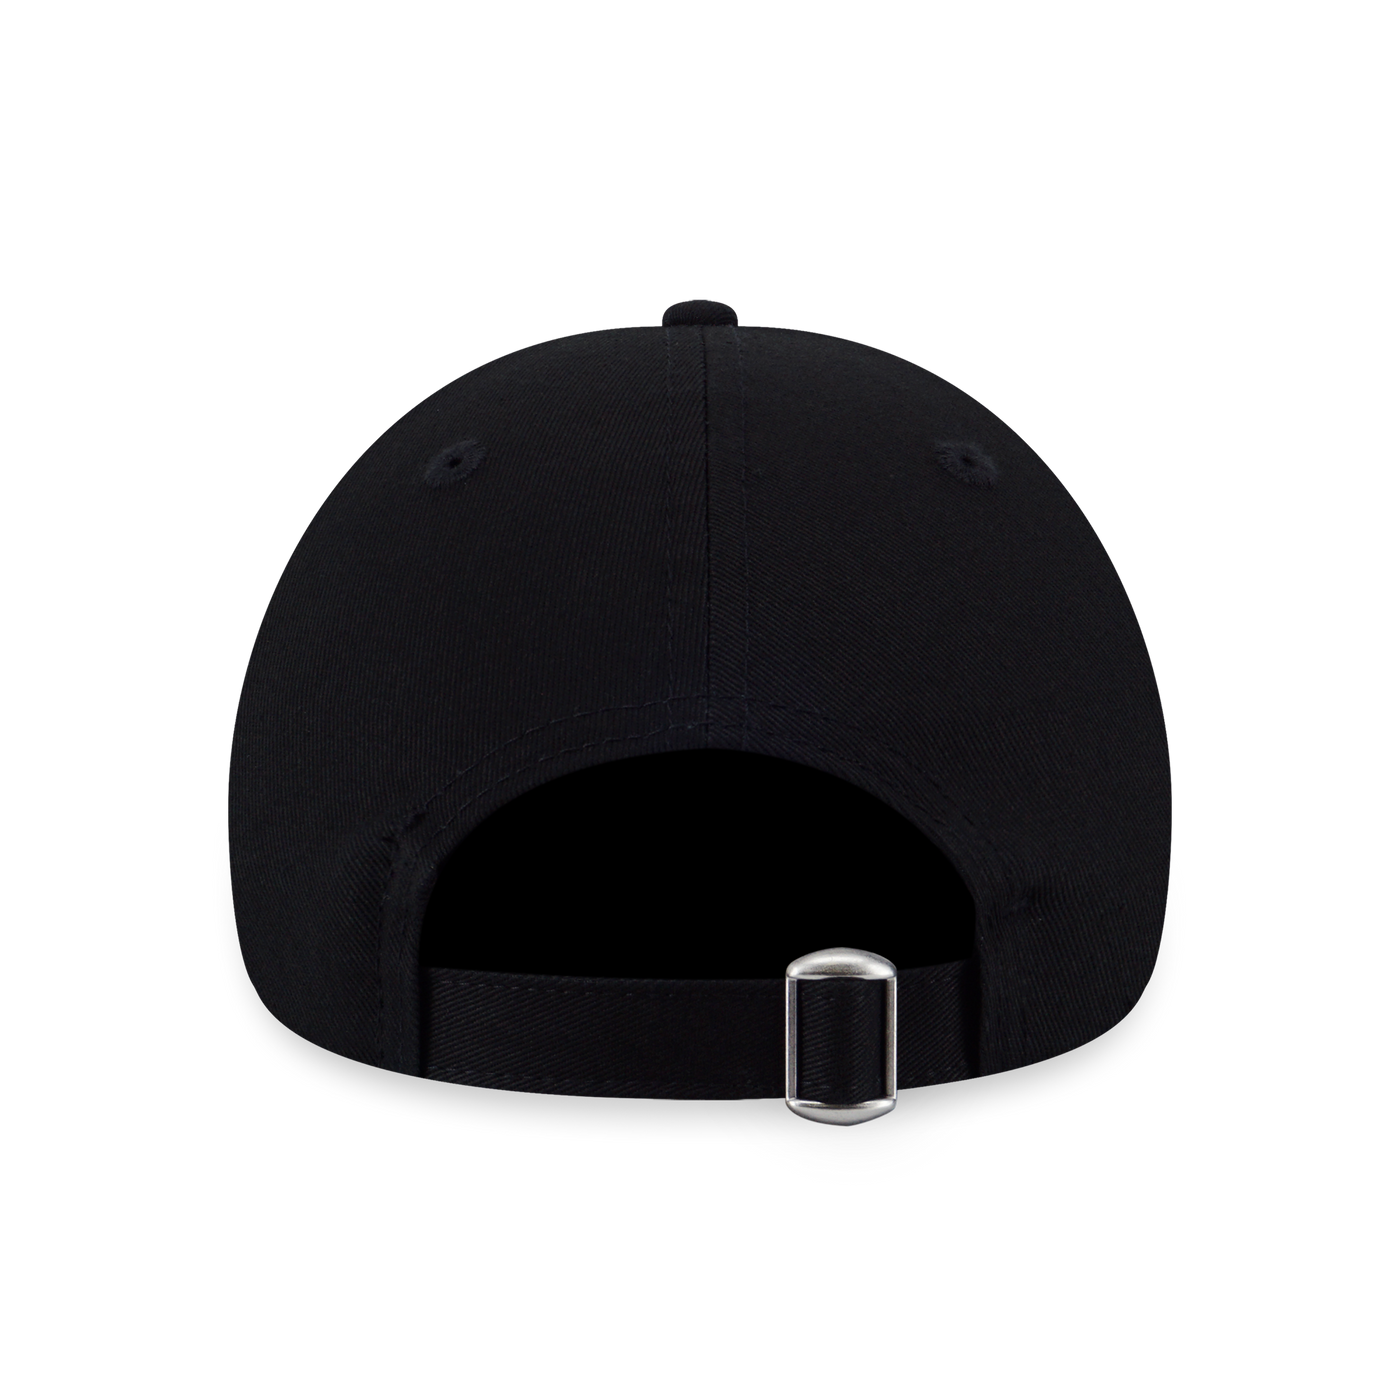 CHICAGO BULLS PARTY VIBE - SUMMER NEON BLACK 9FORTY CAP